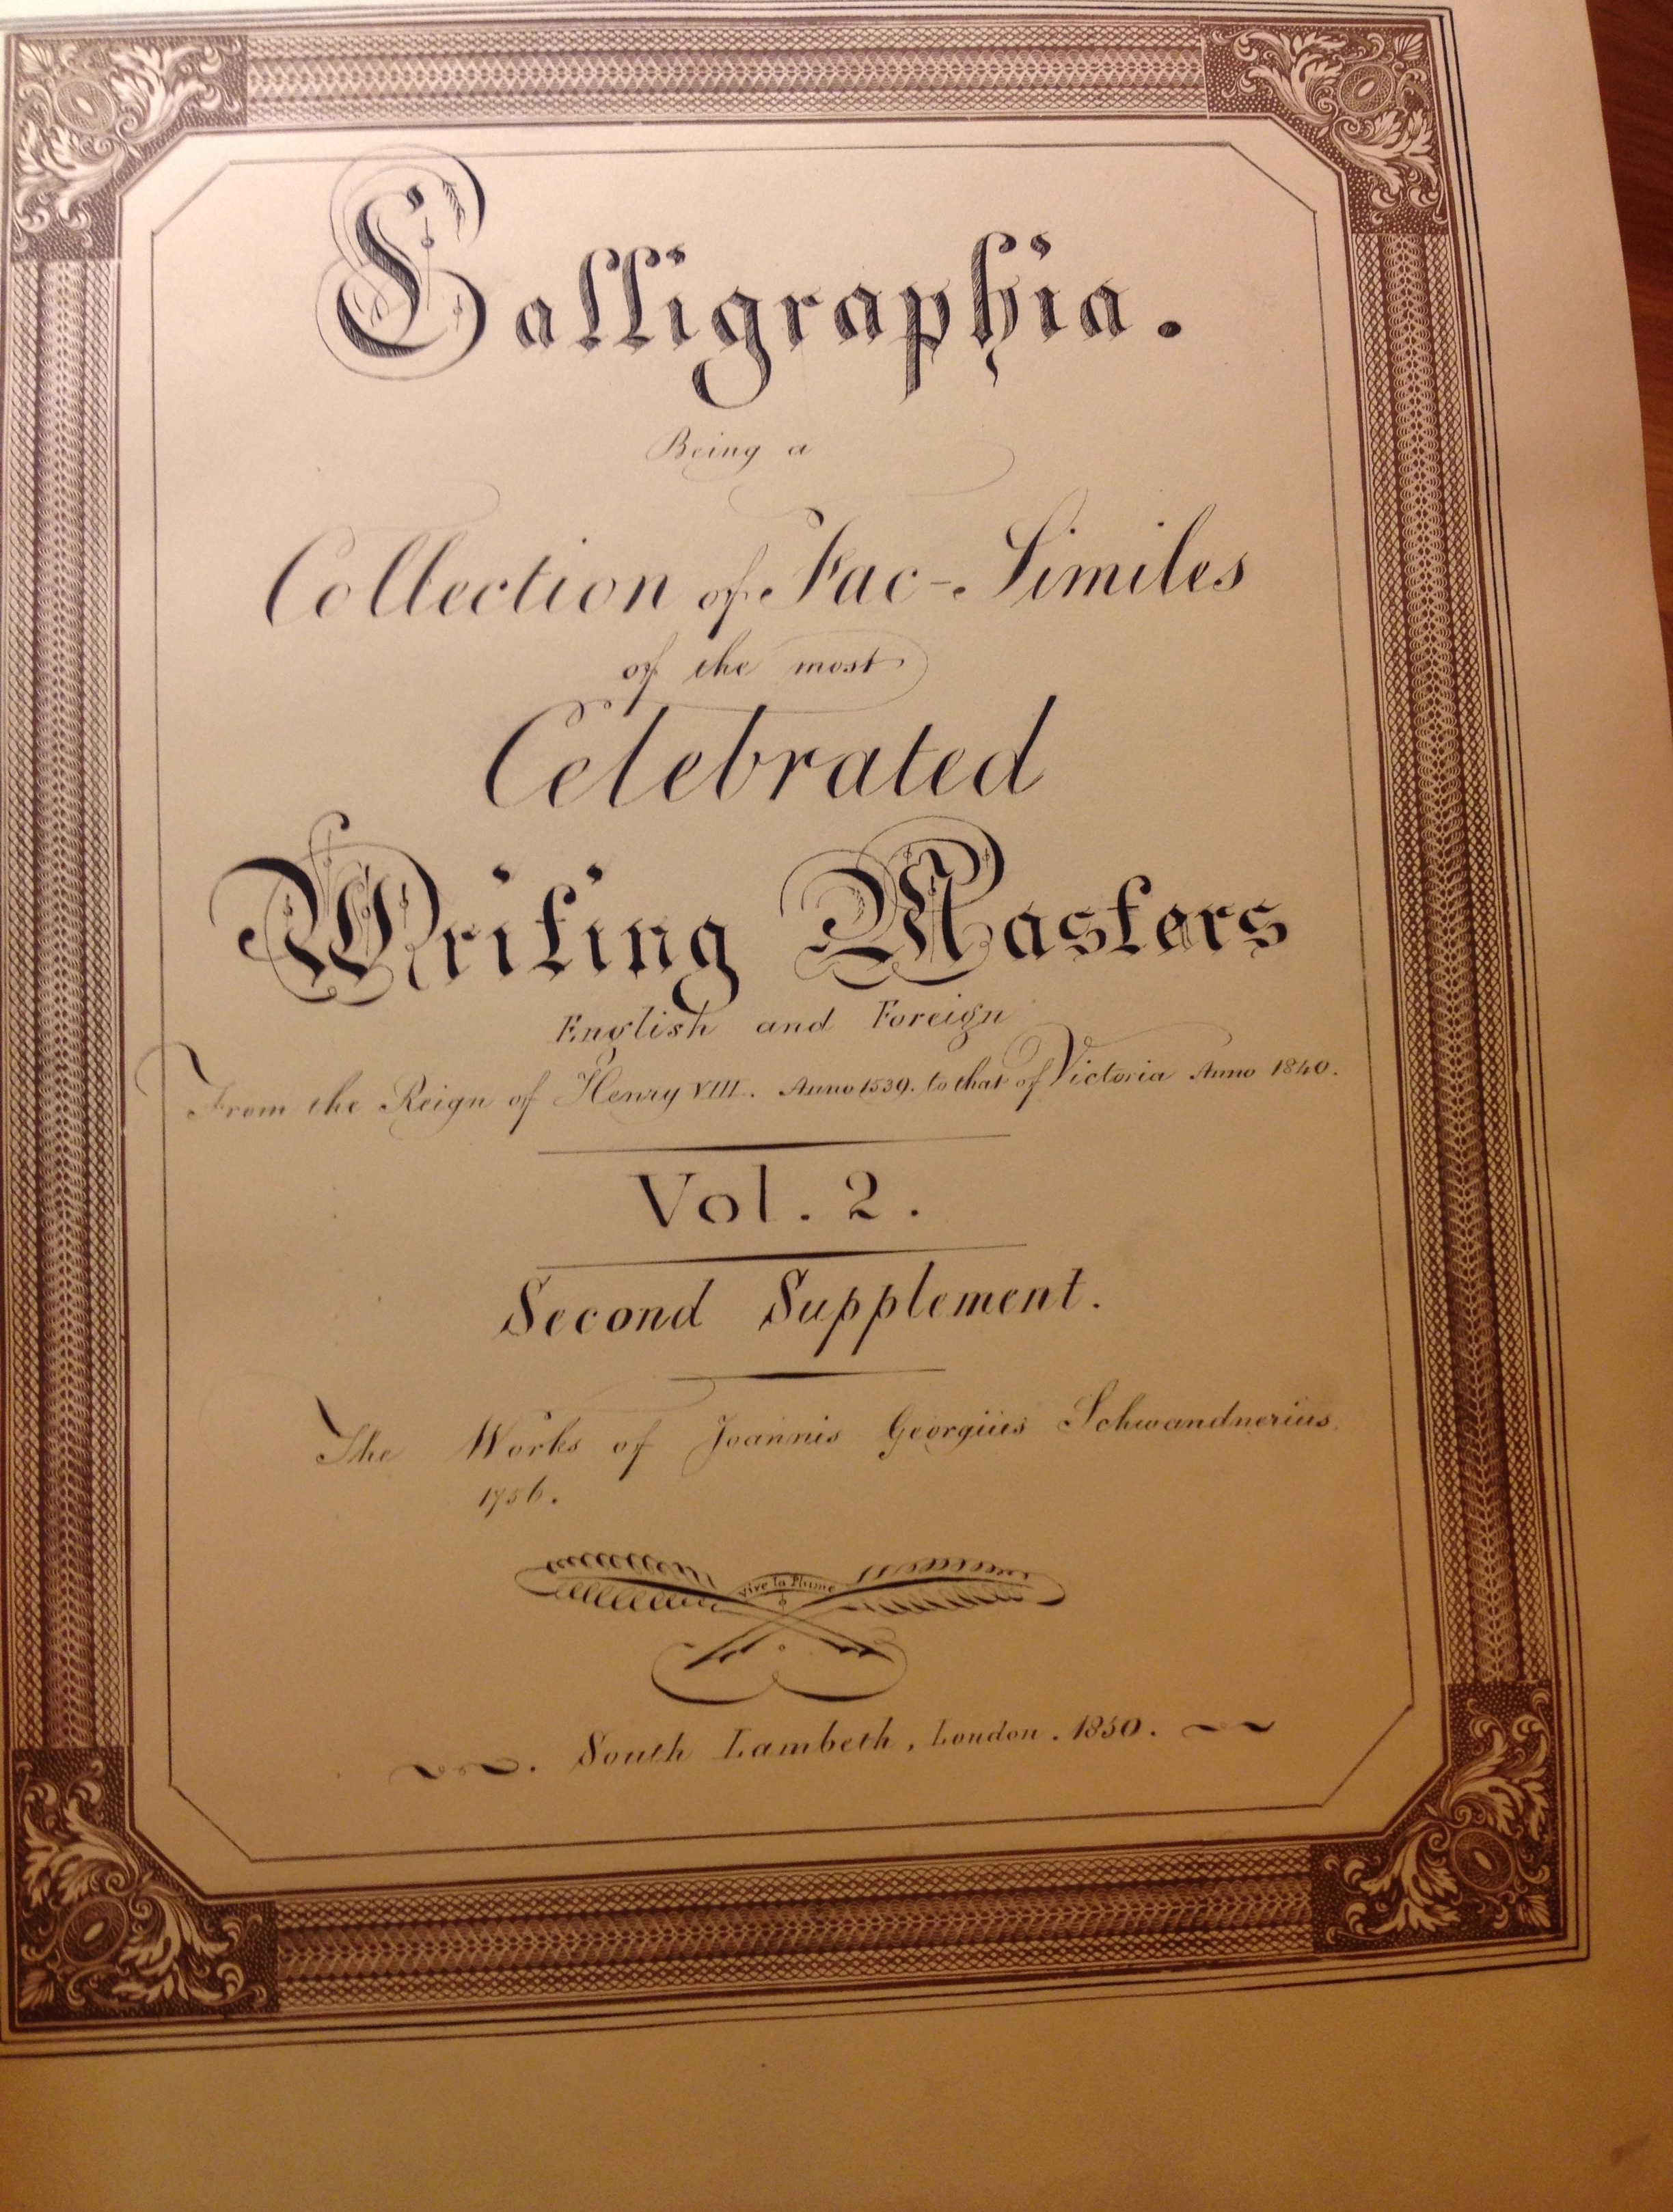 Title page of a volume from the Beaufoy Collection at the Harry Ransom Center